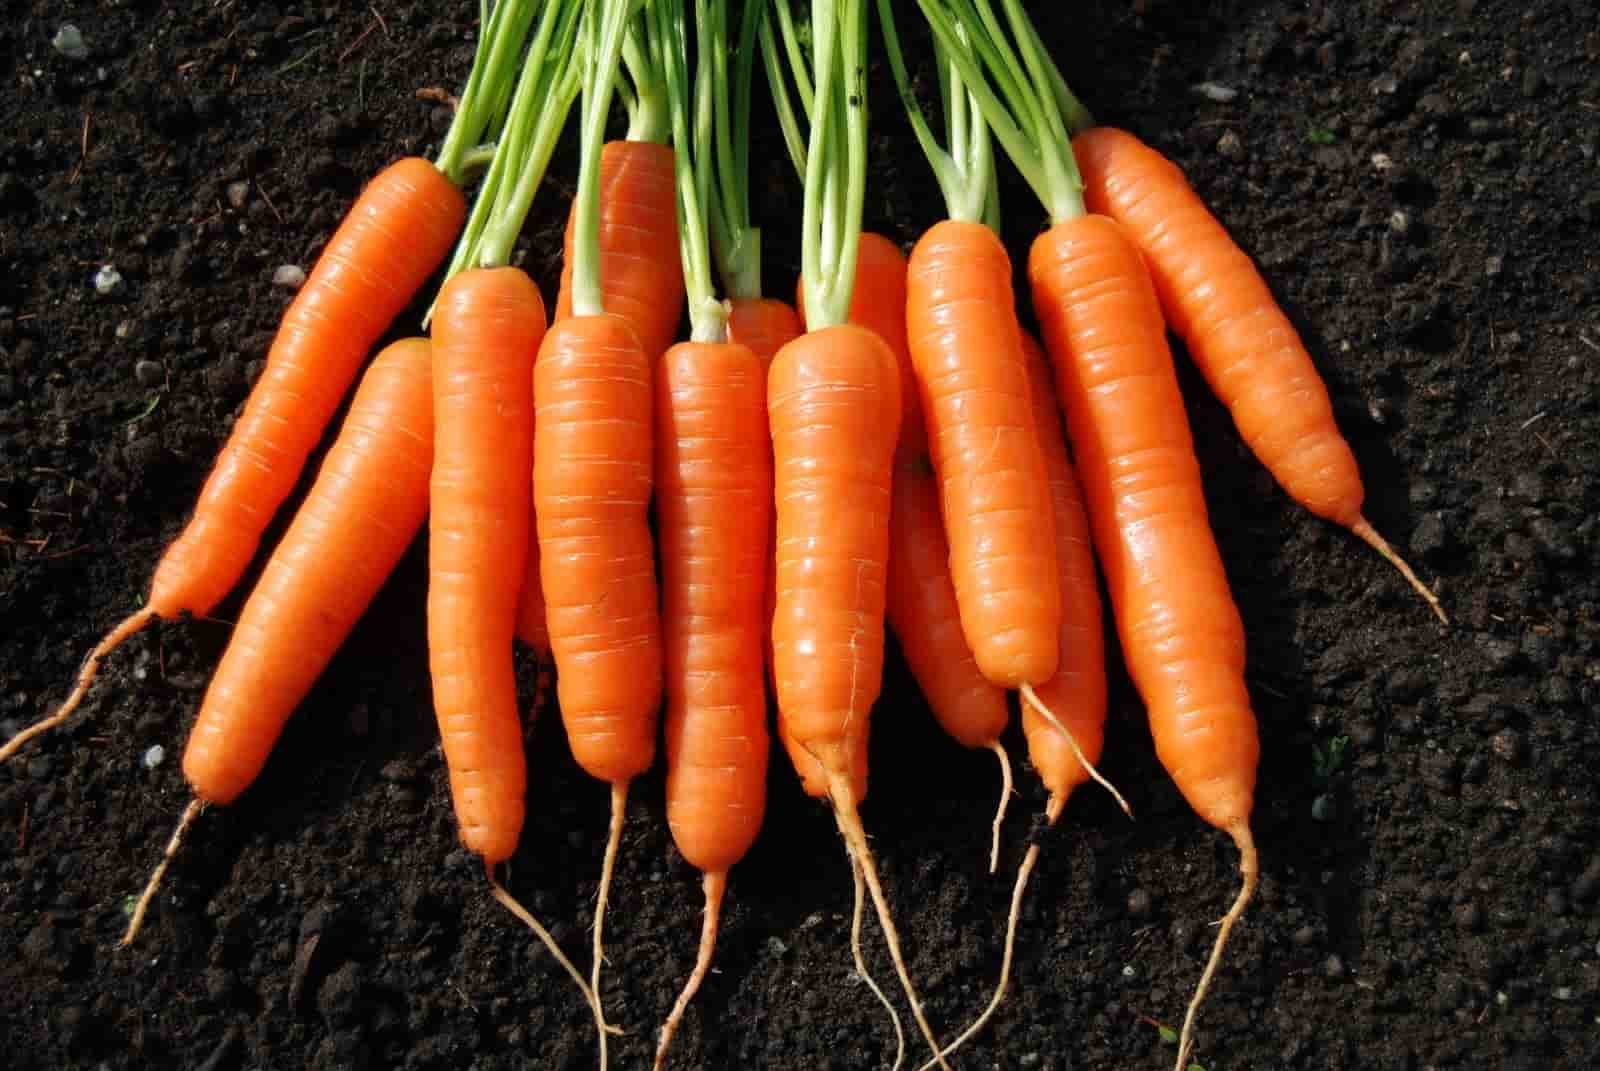 0x0-carrots-could-be-key-to-making-greener-buildings-1540147434424